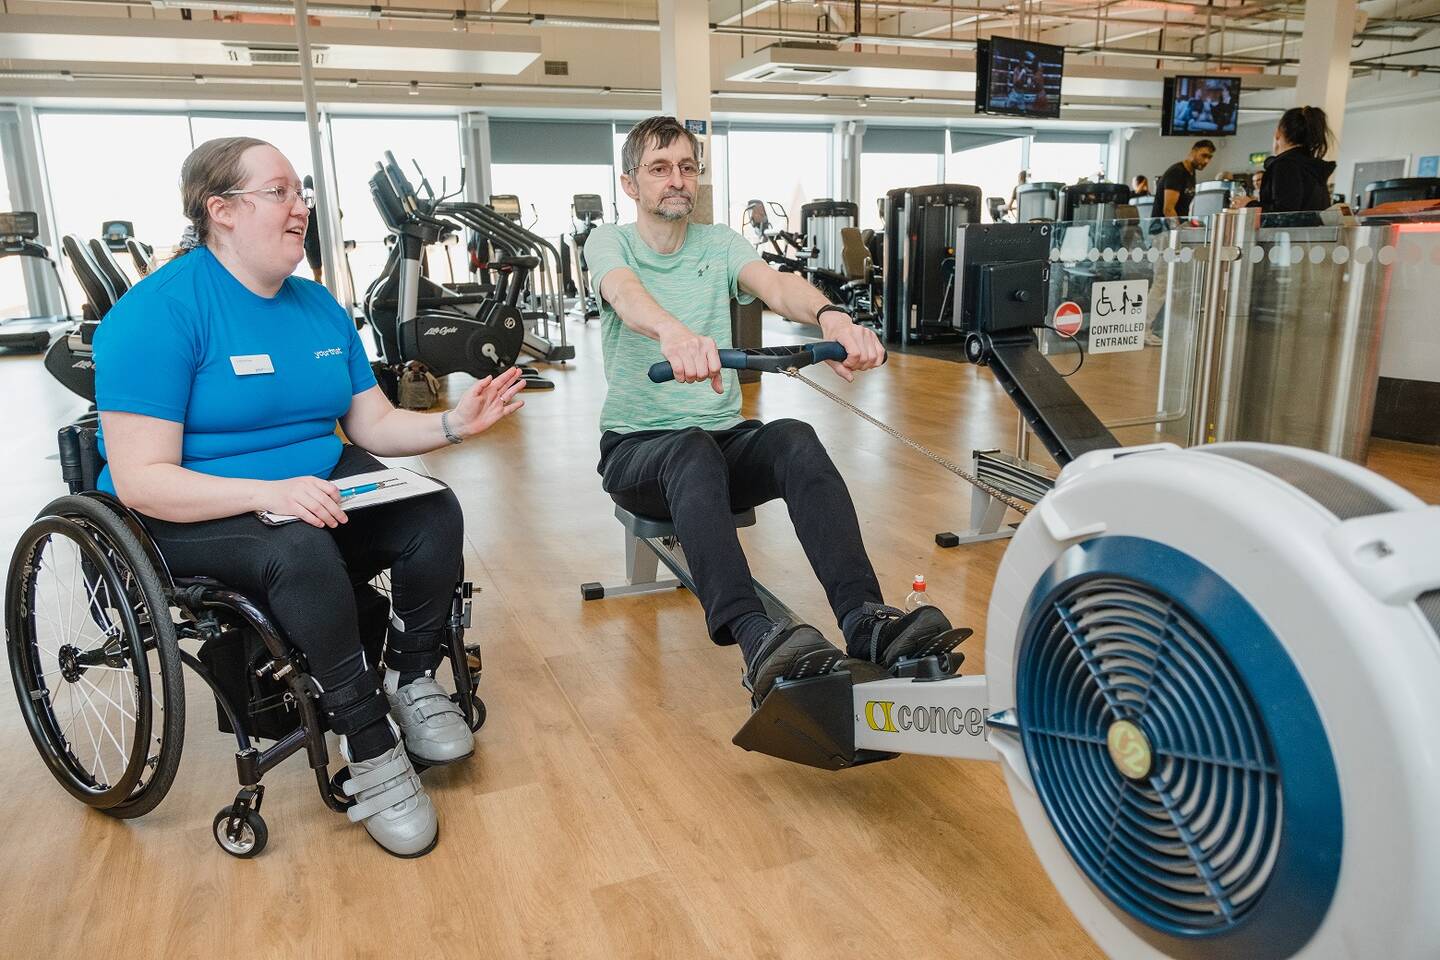 Disabled fitness instructor supporting her client to use the rowing machine in the gym